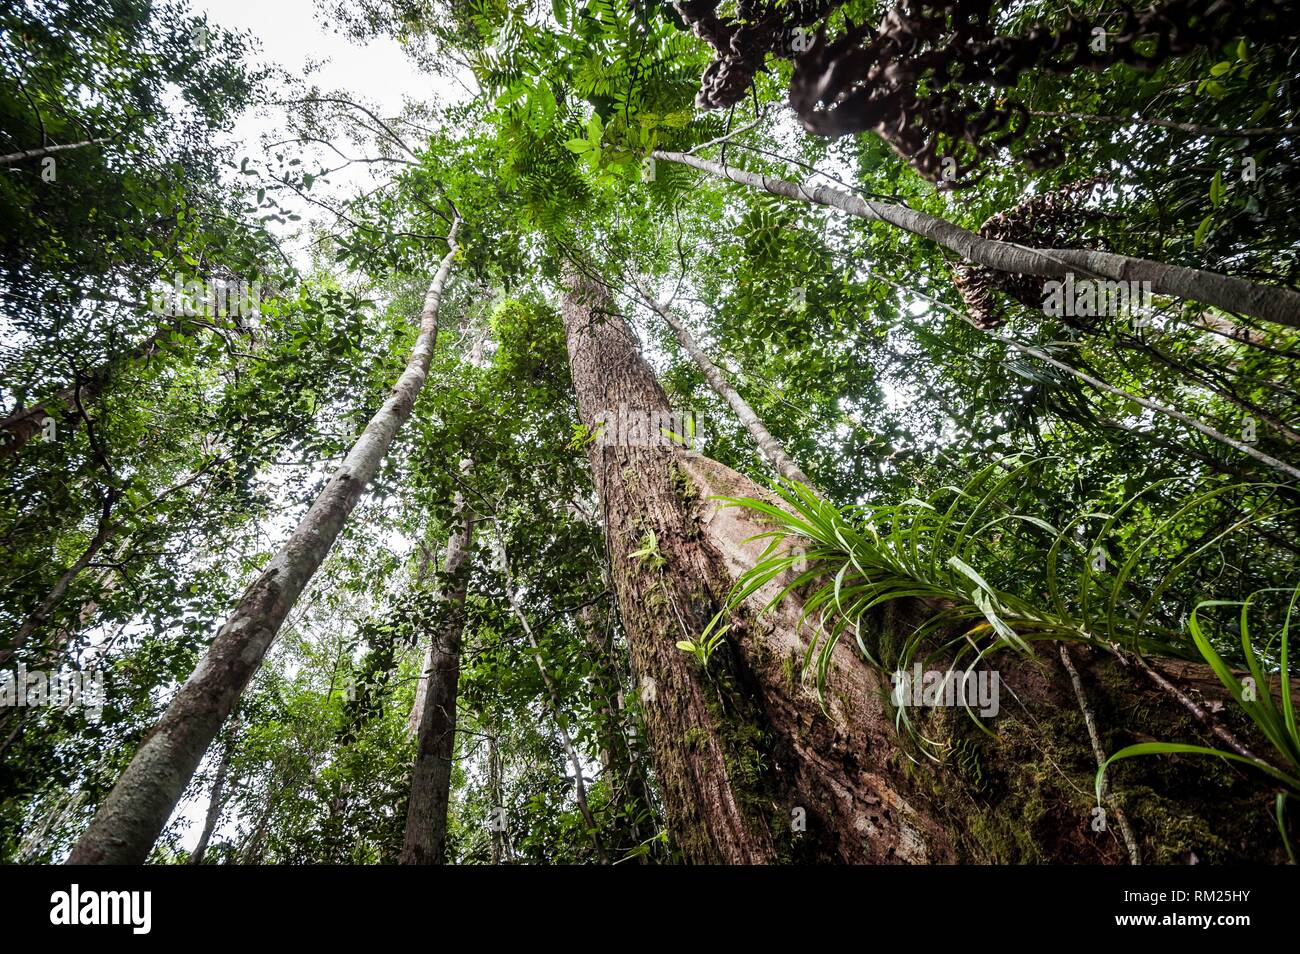 Tropical rainforest in Tanjung Puting National Park (Central Kalimantan Province, Borneo, Indonesia). Stock Photo